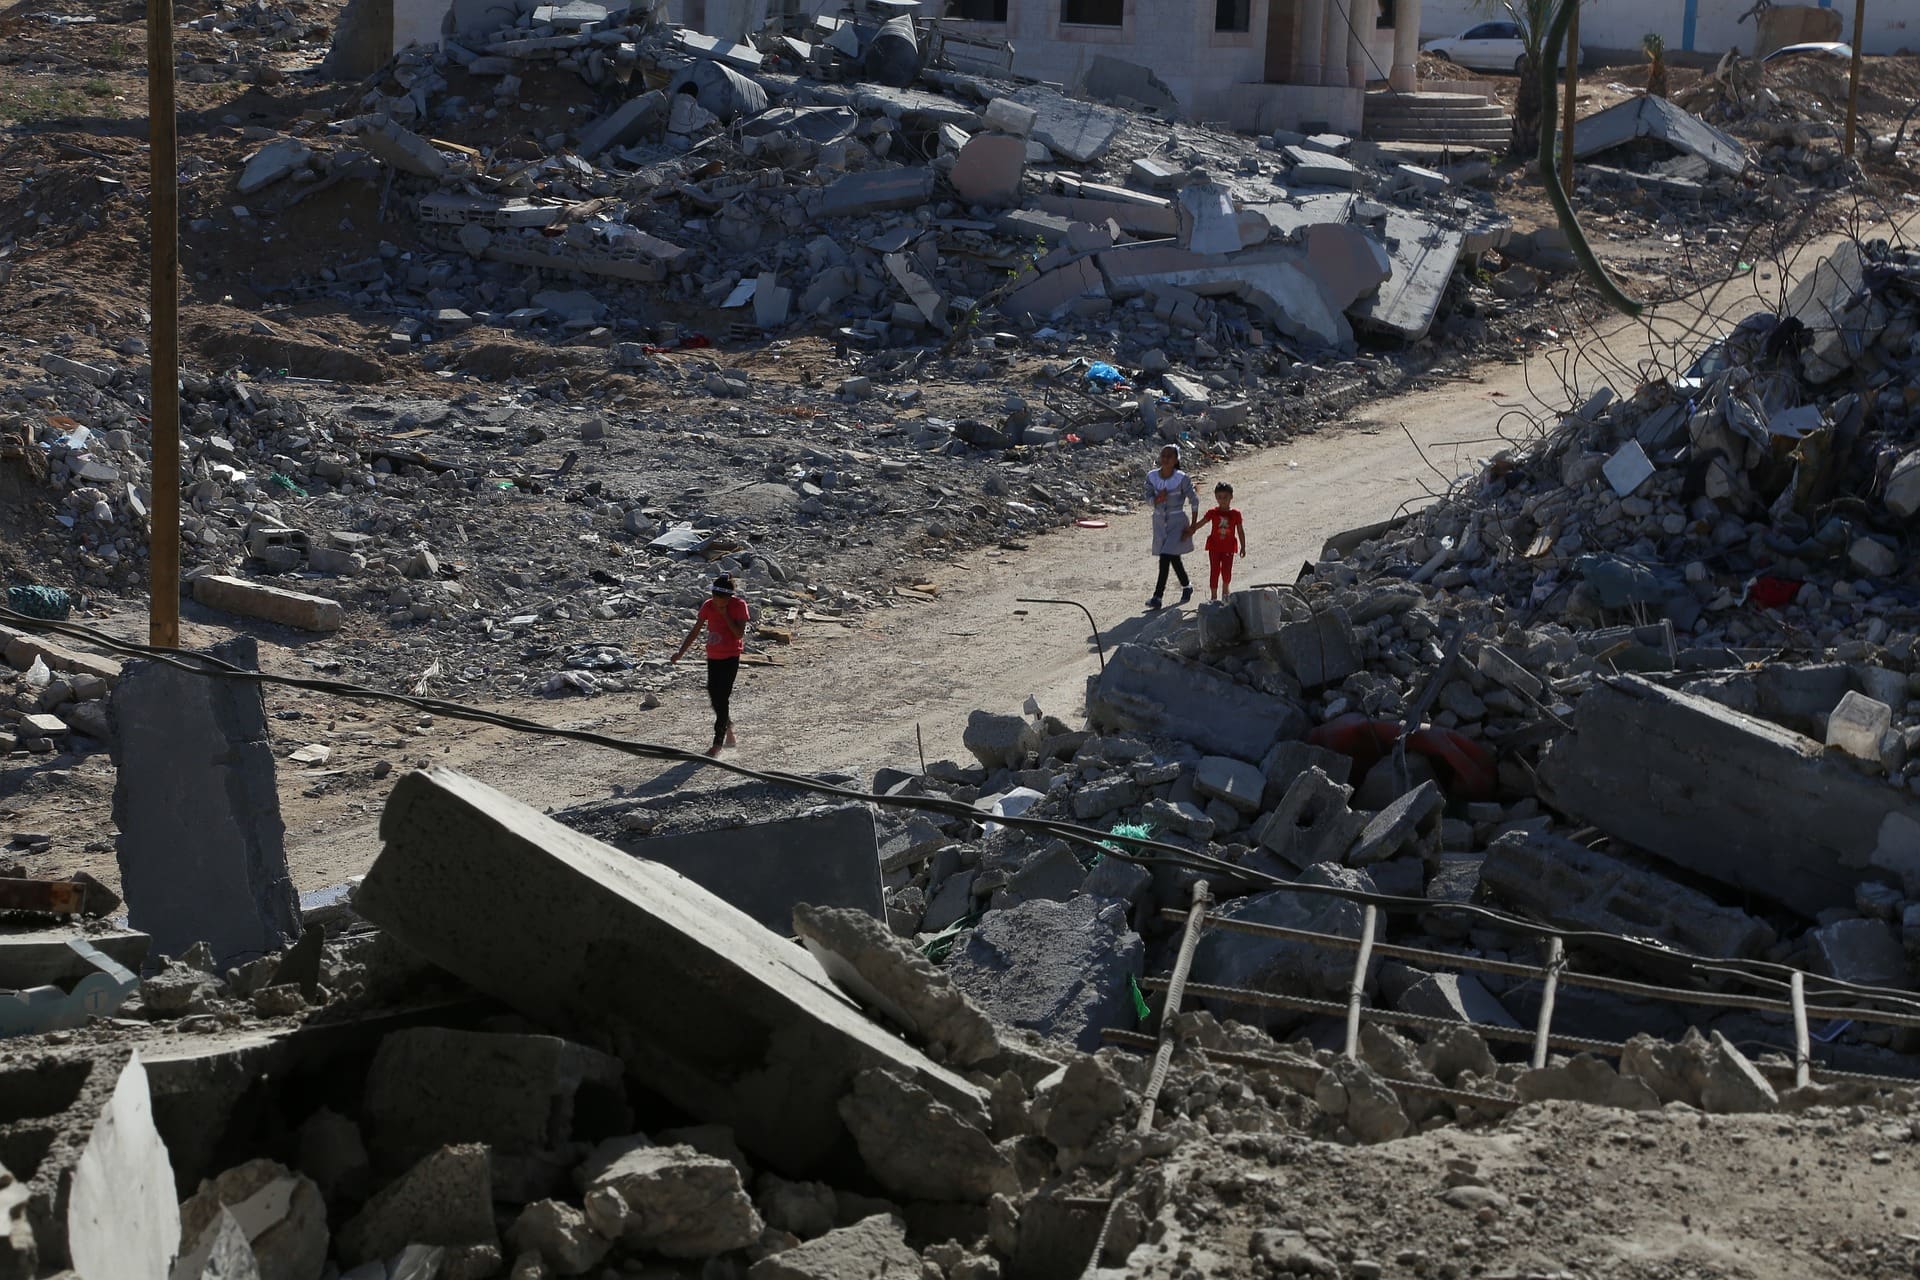 Article - Gaza: Stuck in the Status Quo